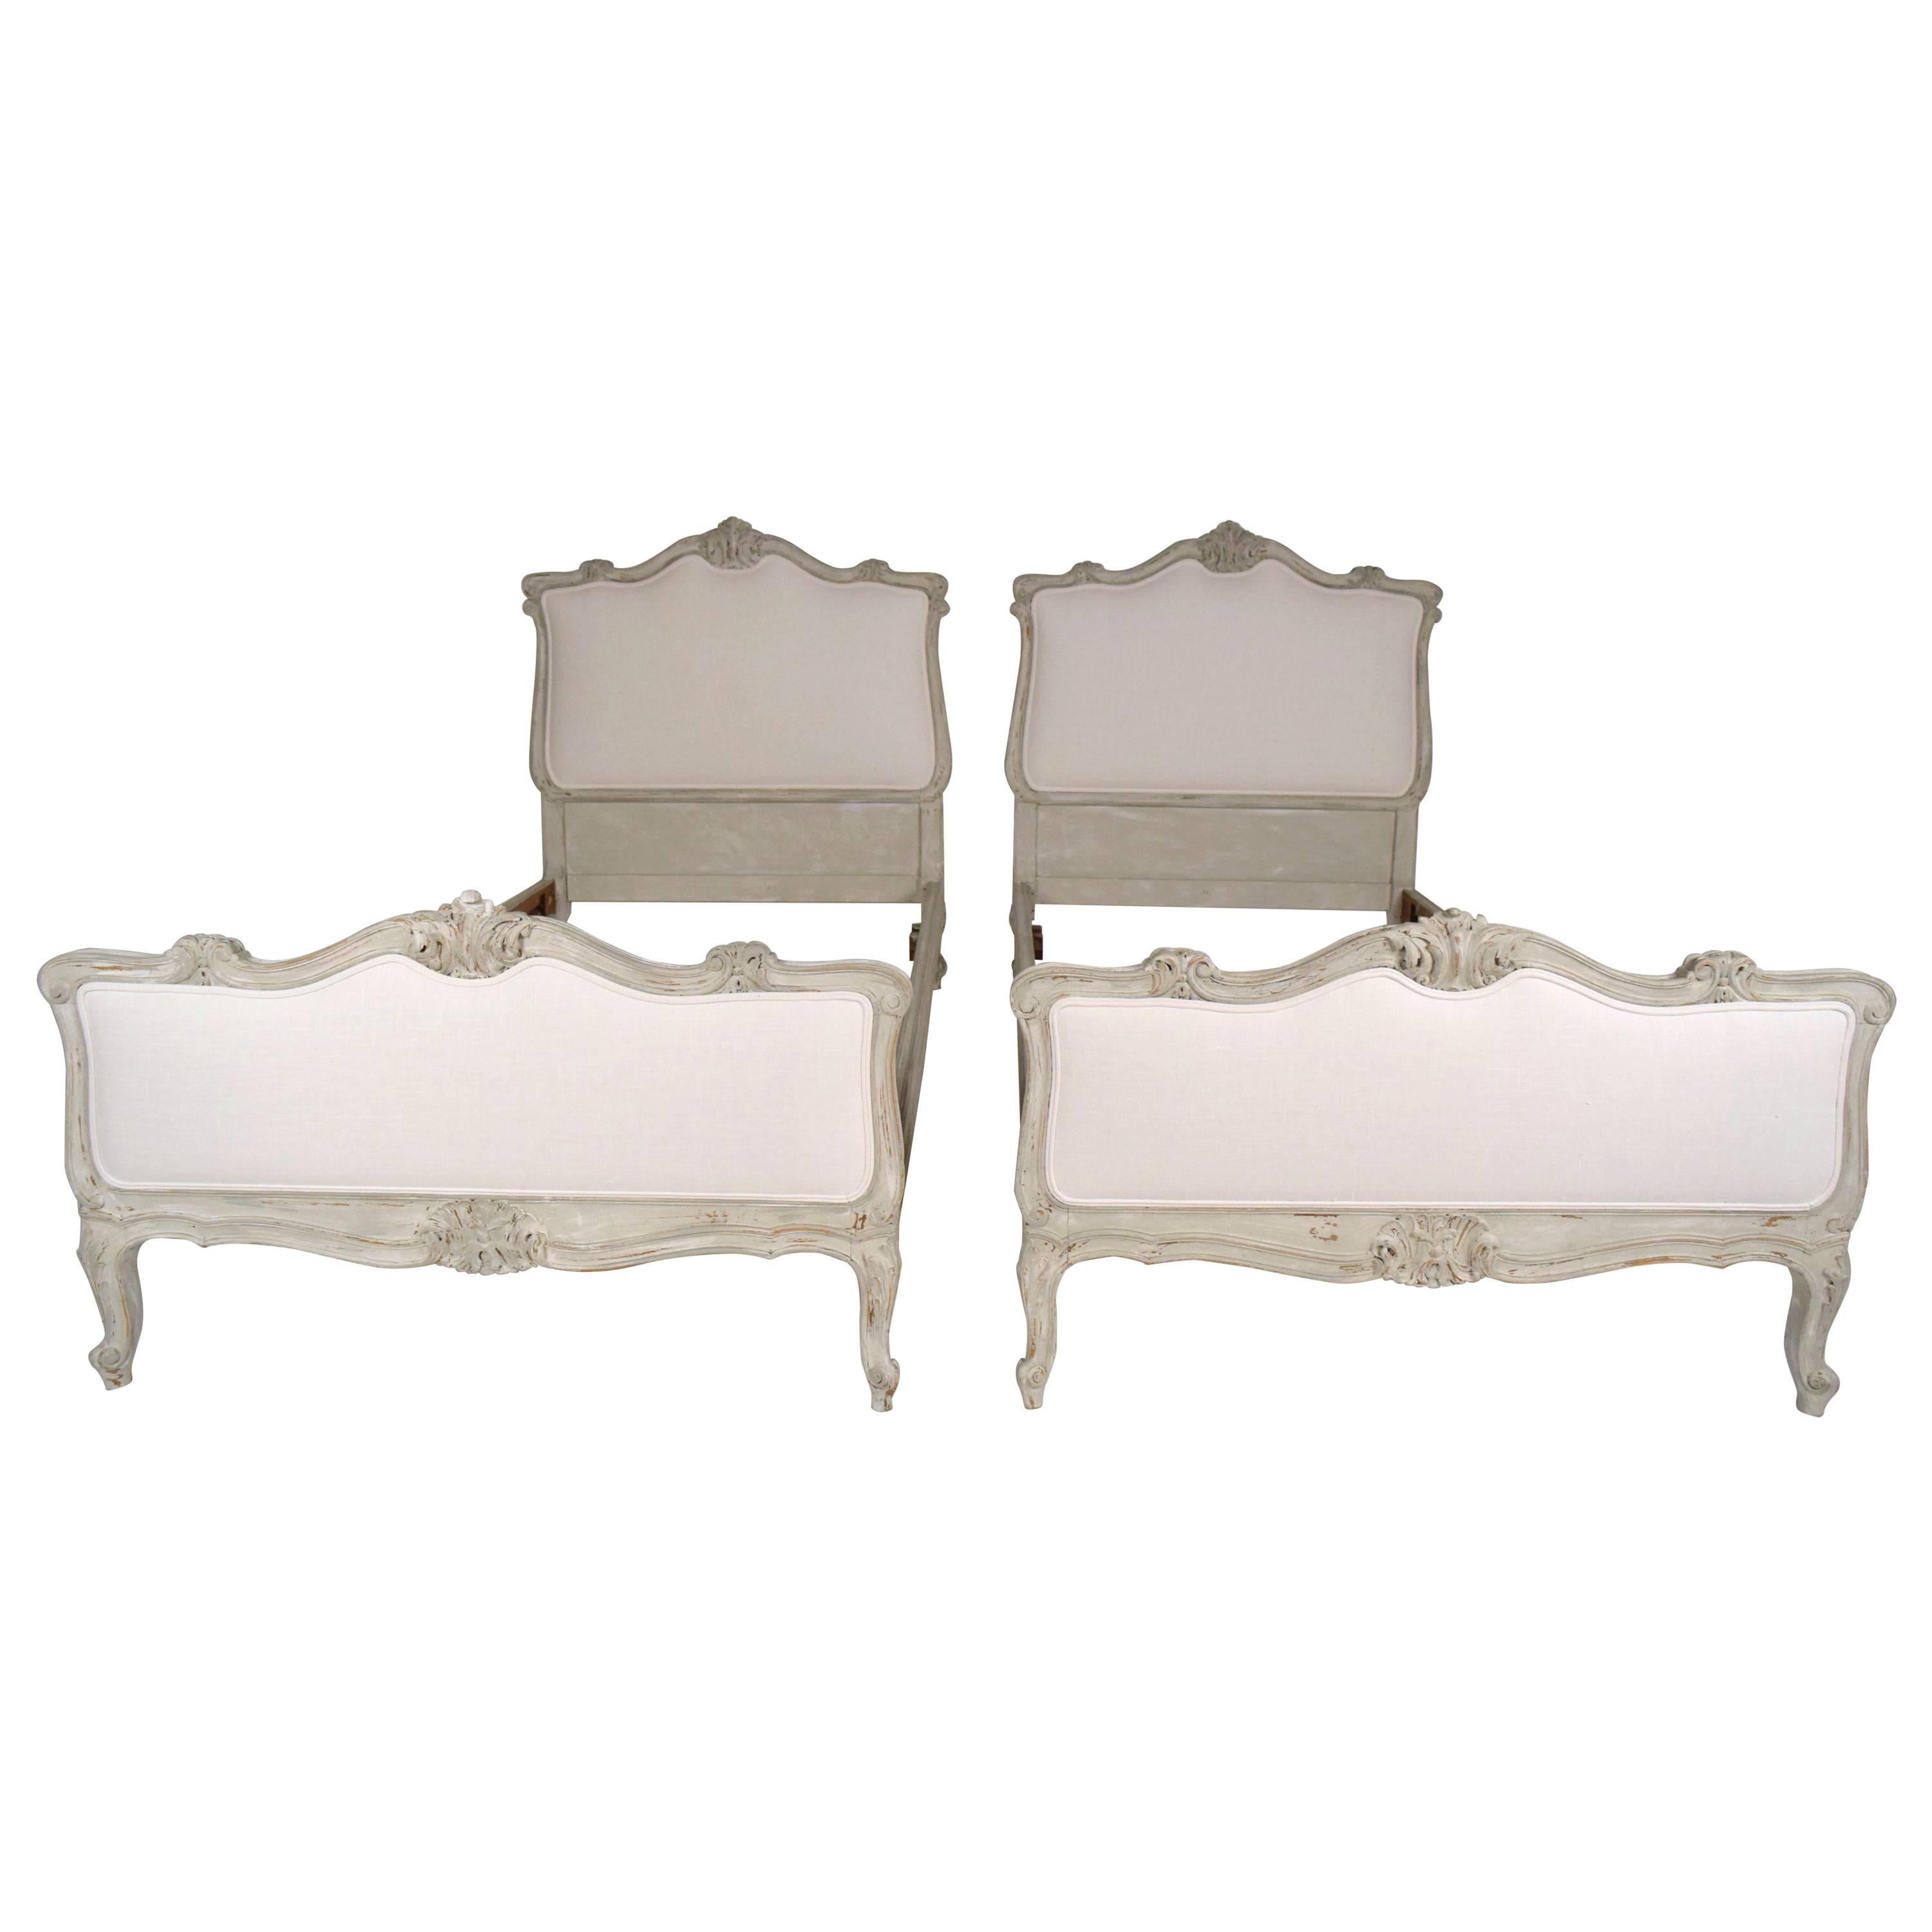 Beautiful Pair of Antiques French Louis XV Beds